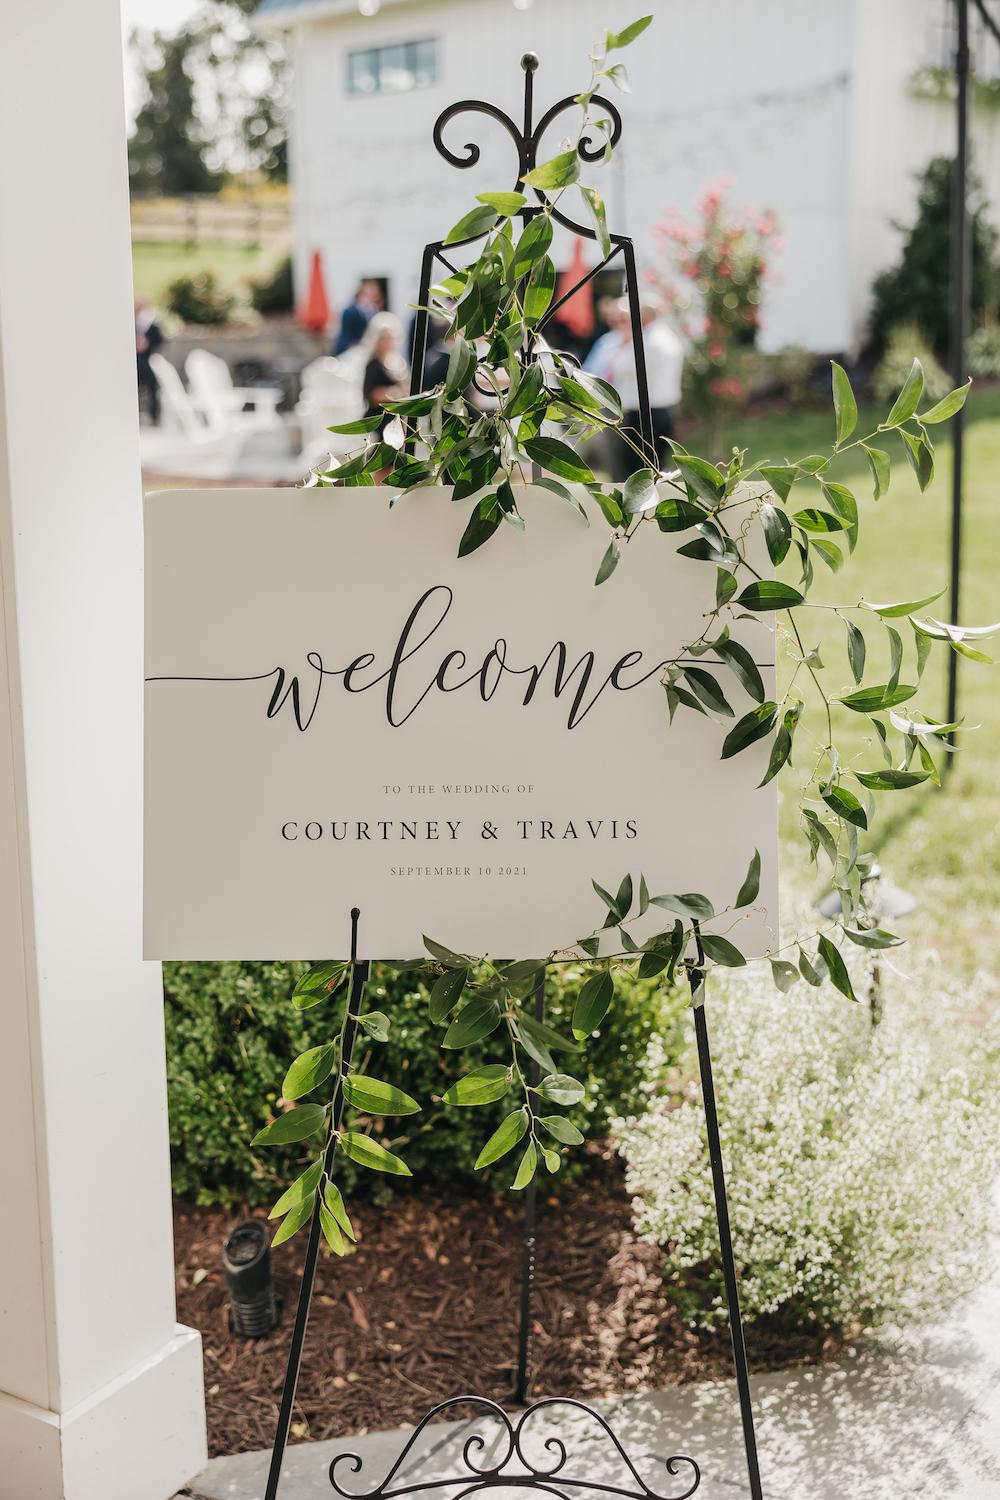 The Ultimate Wedding Vendor List (Checklist Included): Close-up shot of the wedding signage that reads 'Welcome to the Wedding of Courtney & Travis'